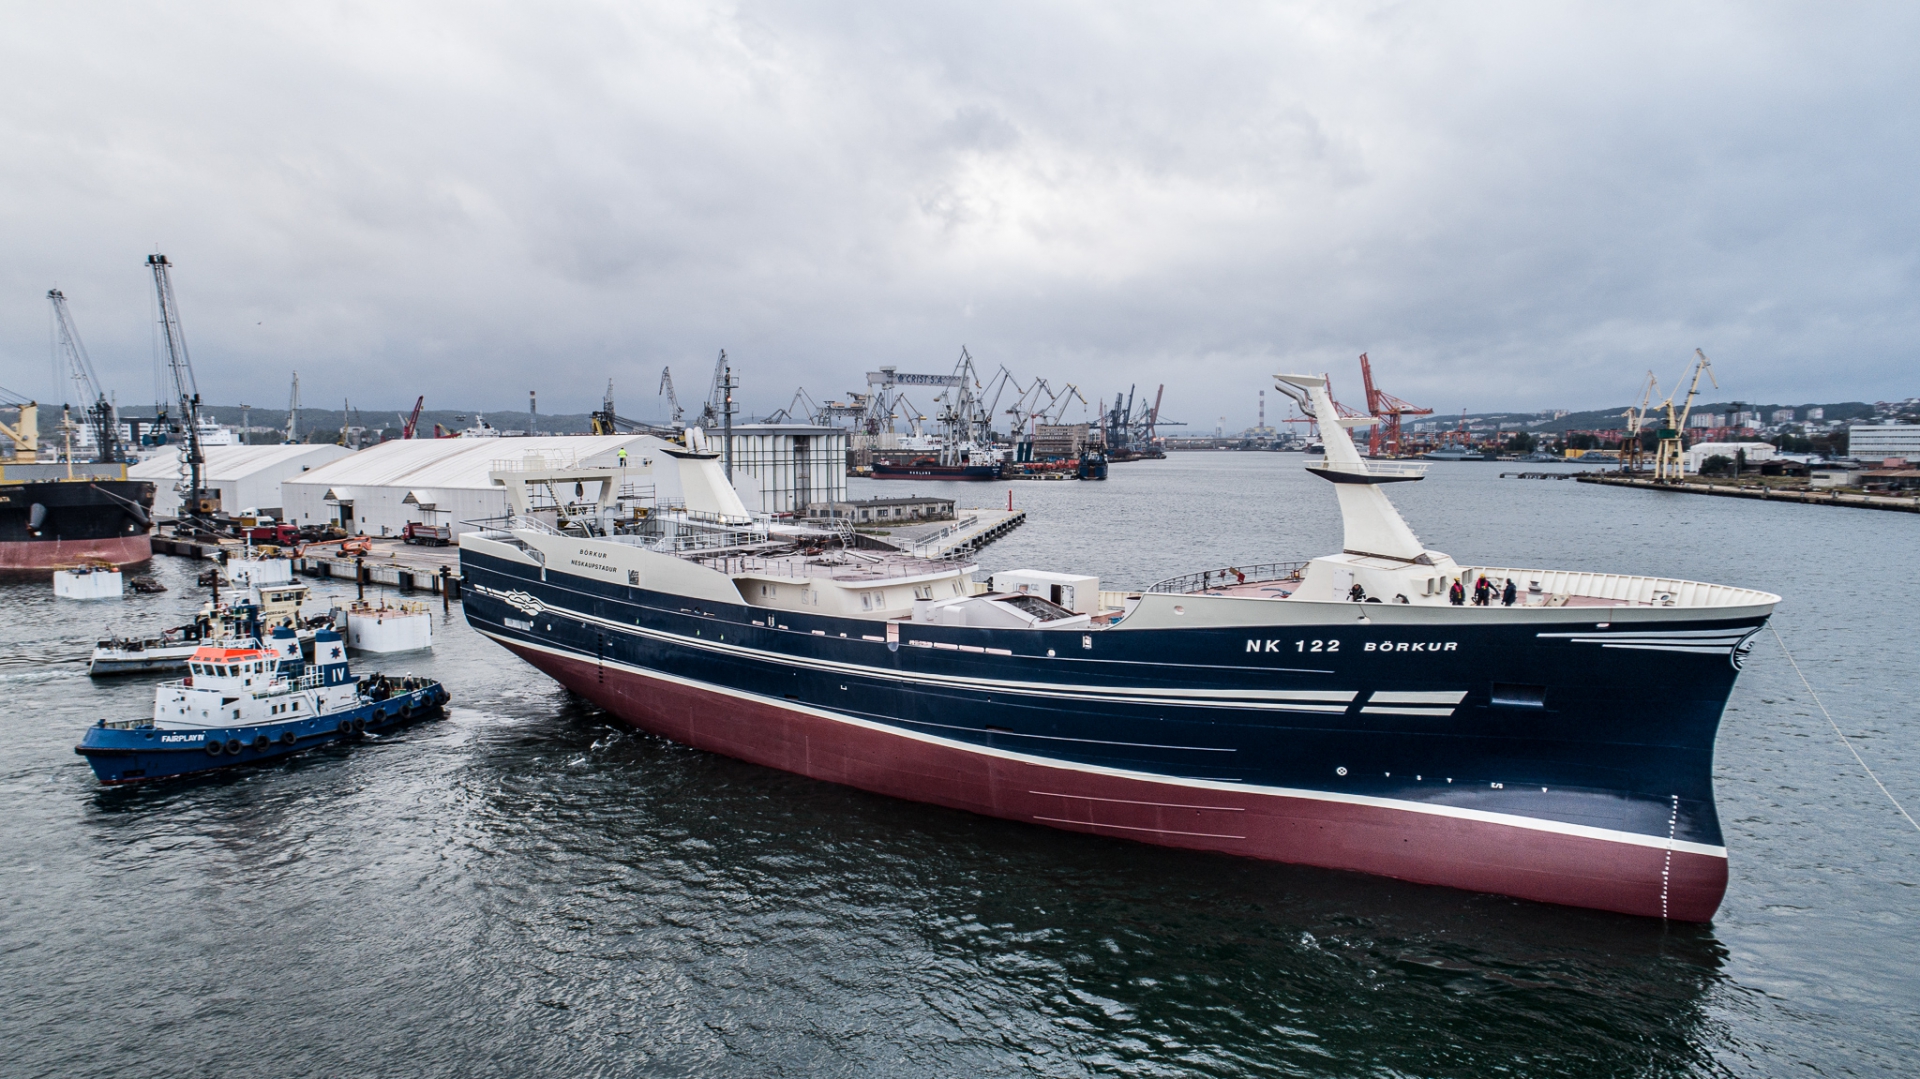 A fishing vessel for Icelanders has been launched at Karstensen Shipyard Poland in Gdynia [photo, video] - MarinePoland.com